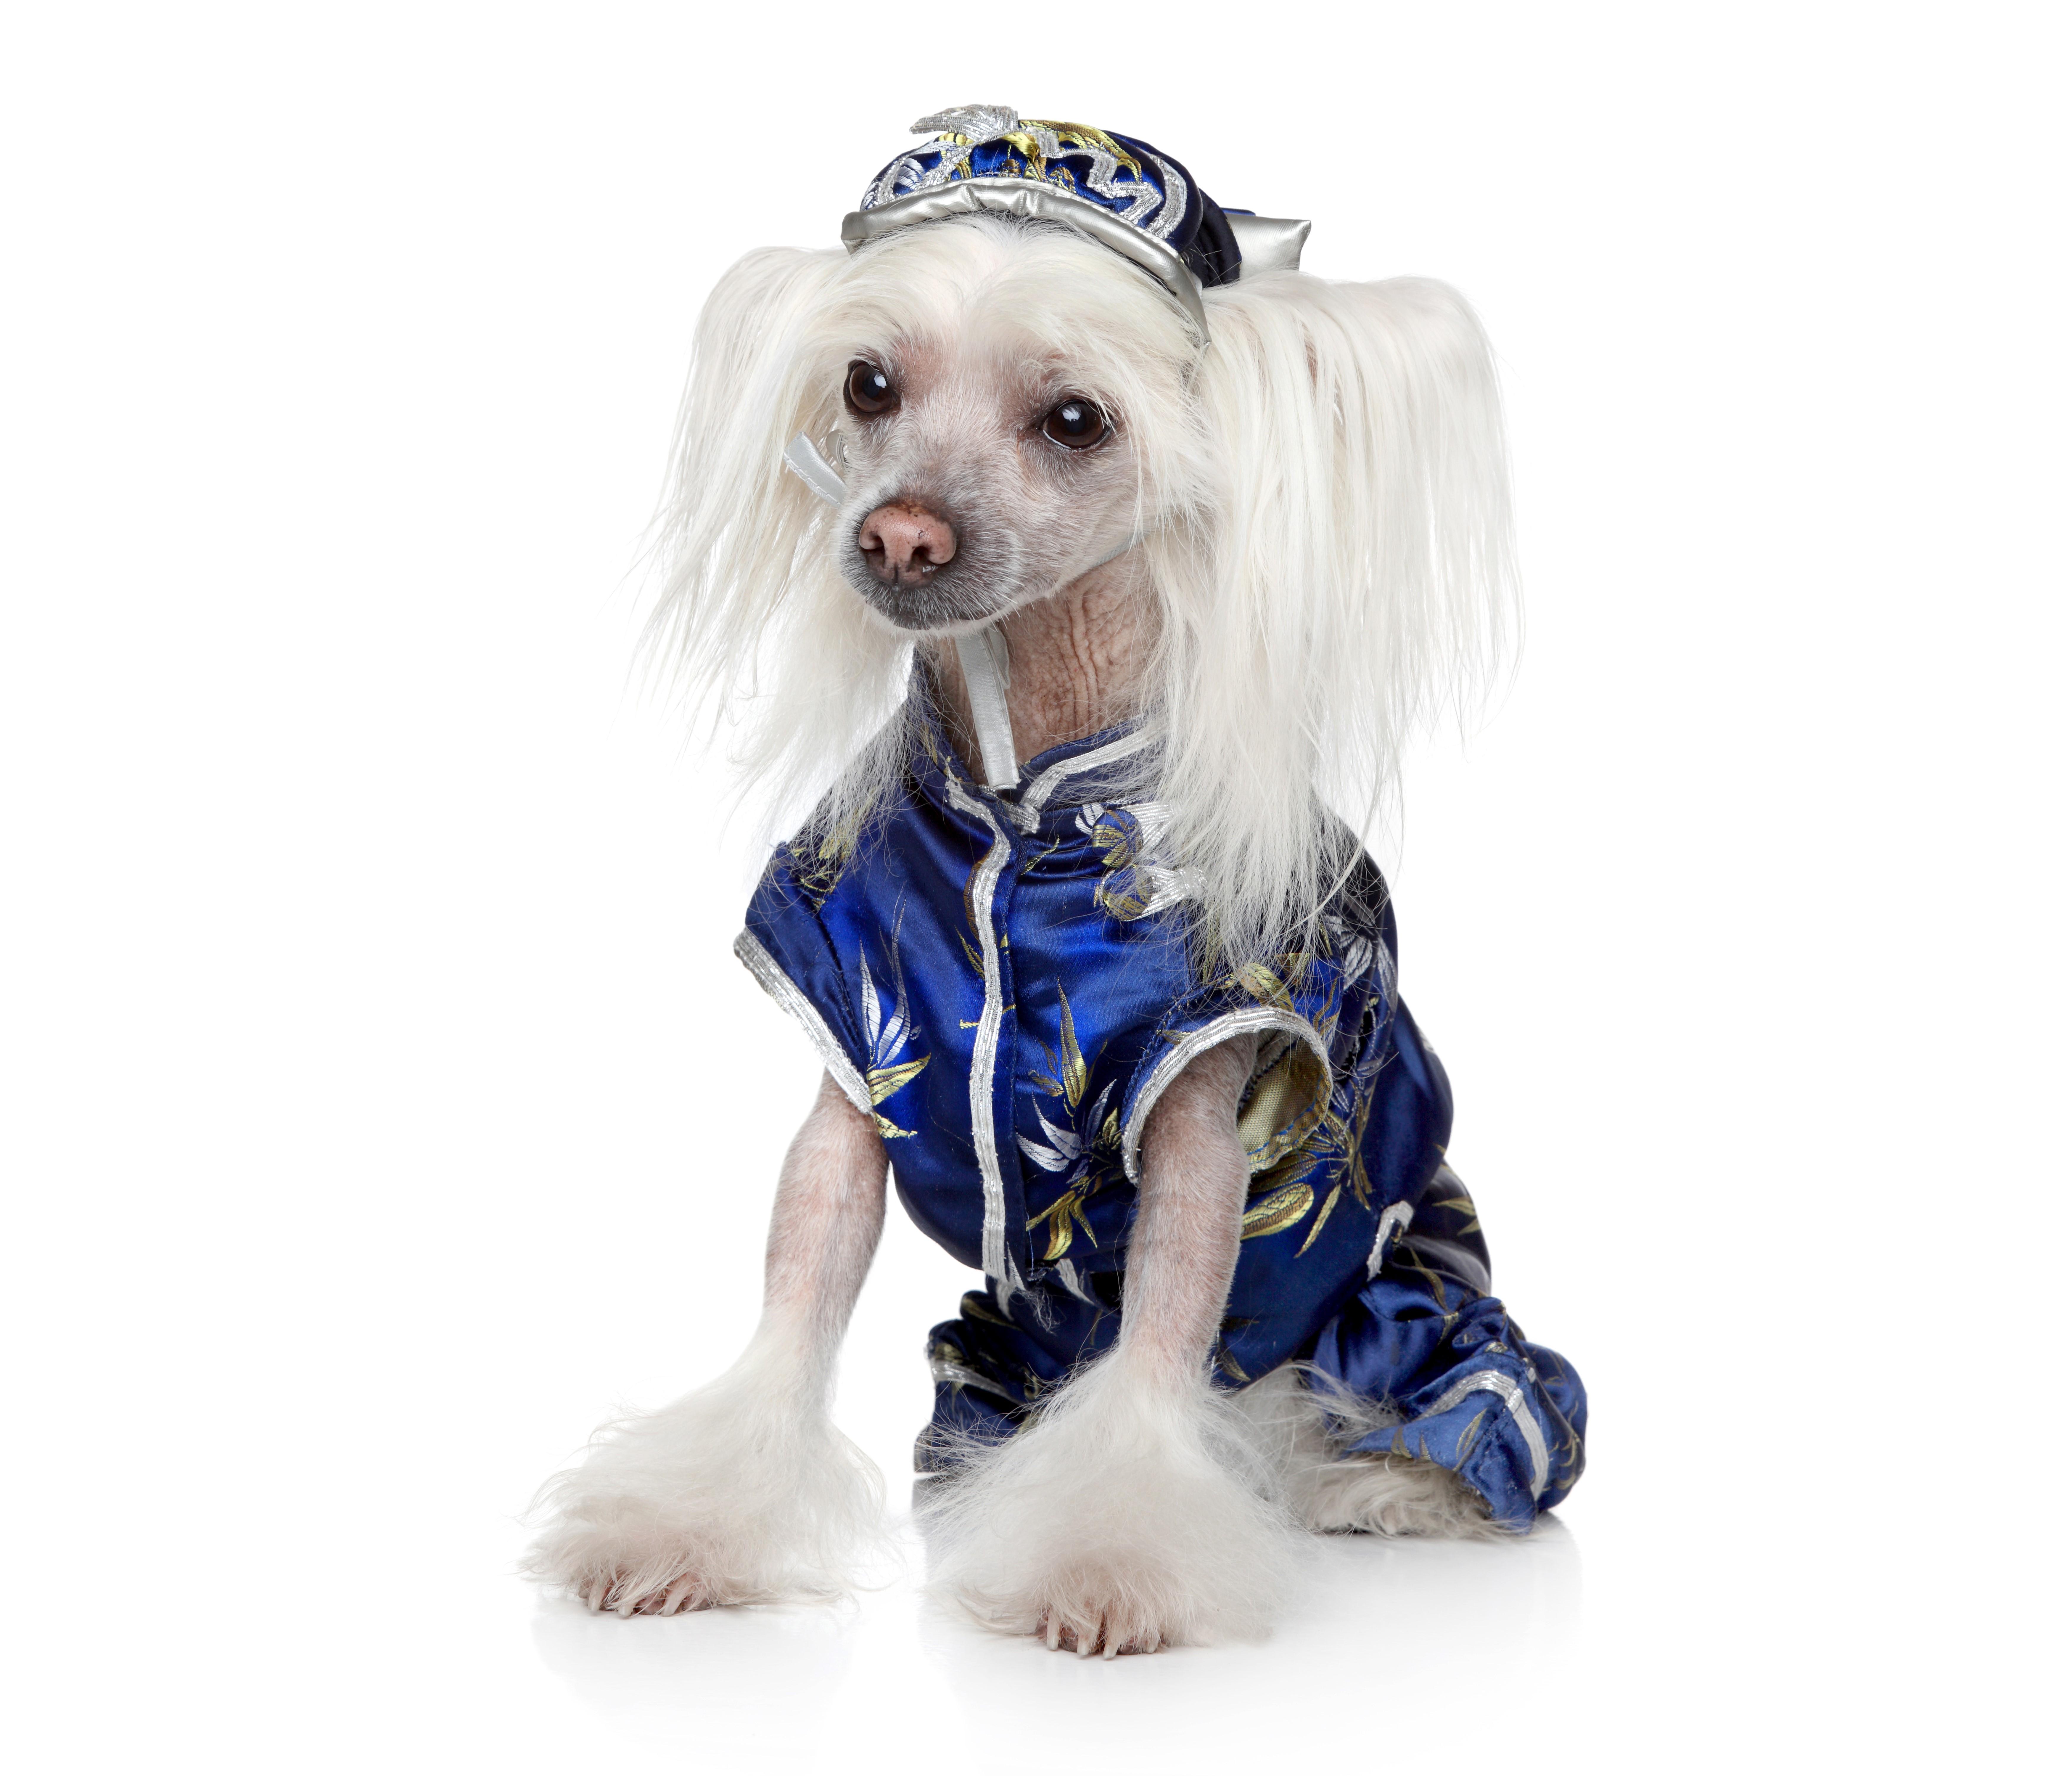 774558 4K 5K 6K 7K Dogs Clothes Uniform Chinese Crested